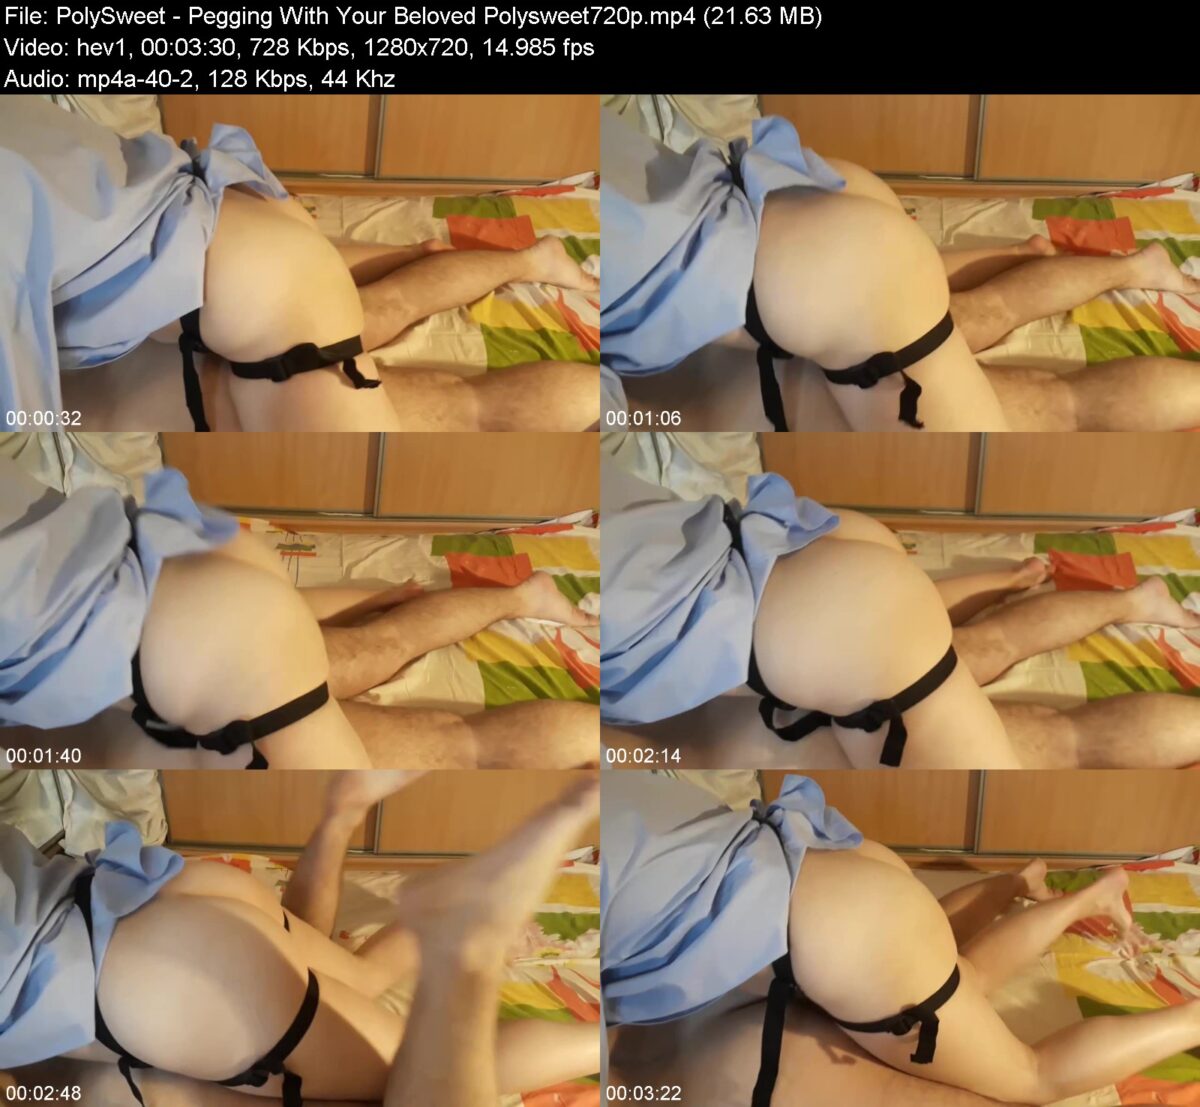 PolySweet in Pegging With Your Beloved Polysweet720p